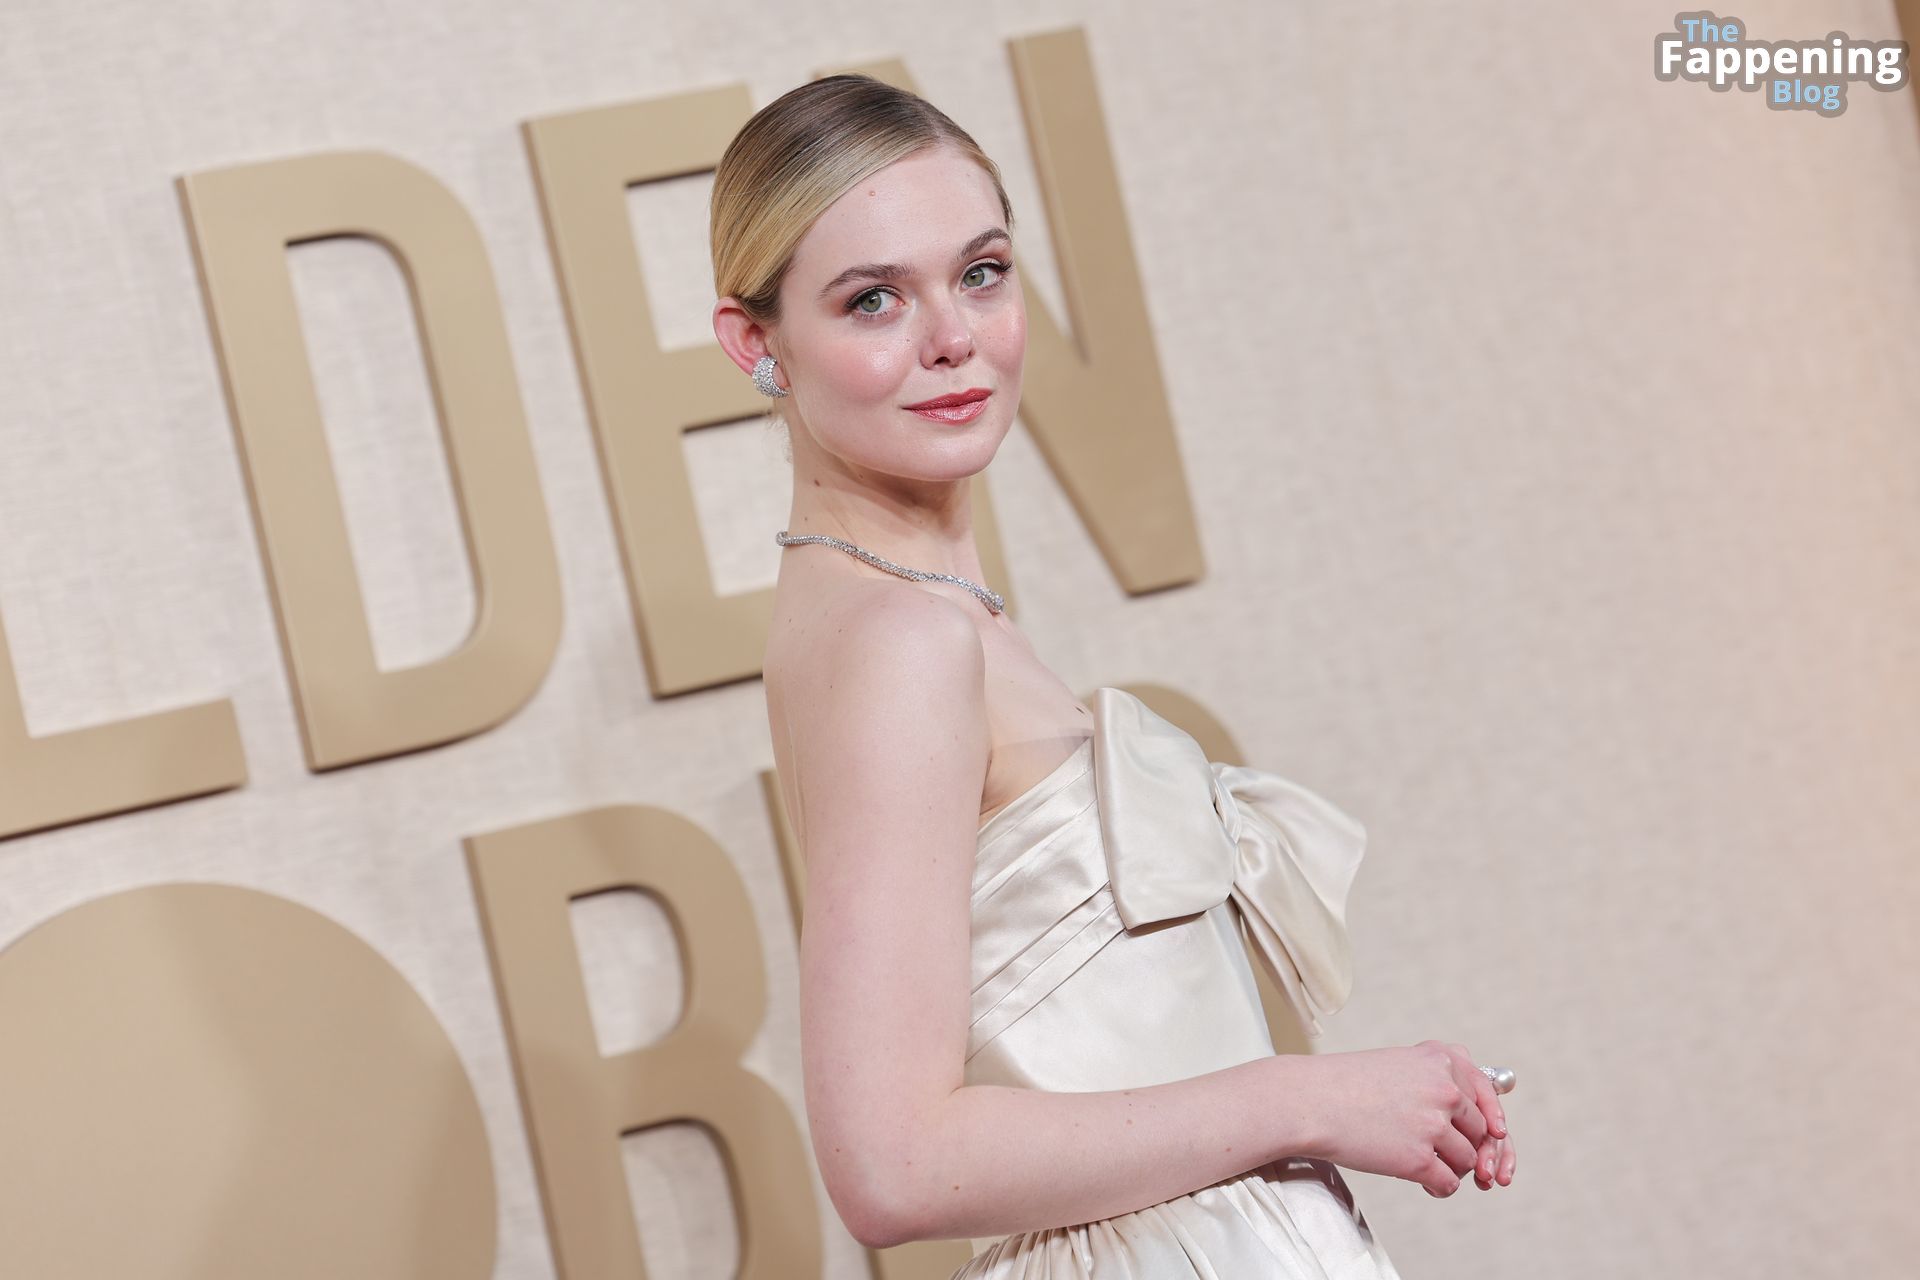 Elle-Fanning-Sexy-104-The-Fappening-Blog.jpg